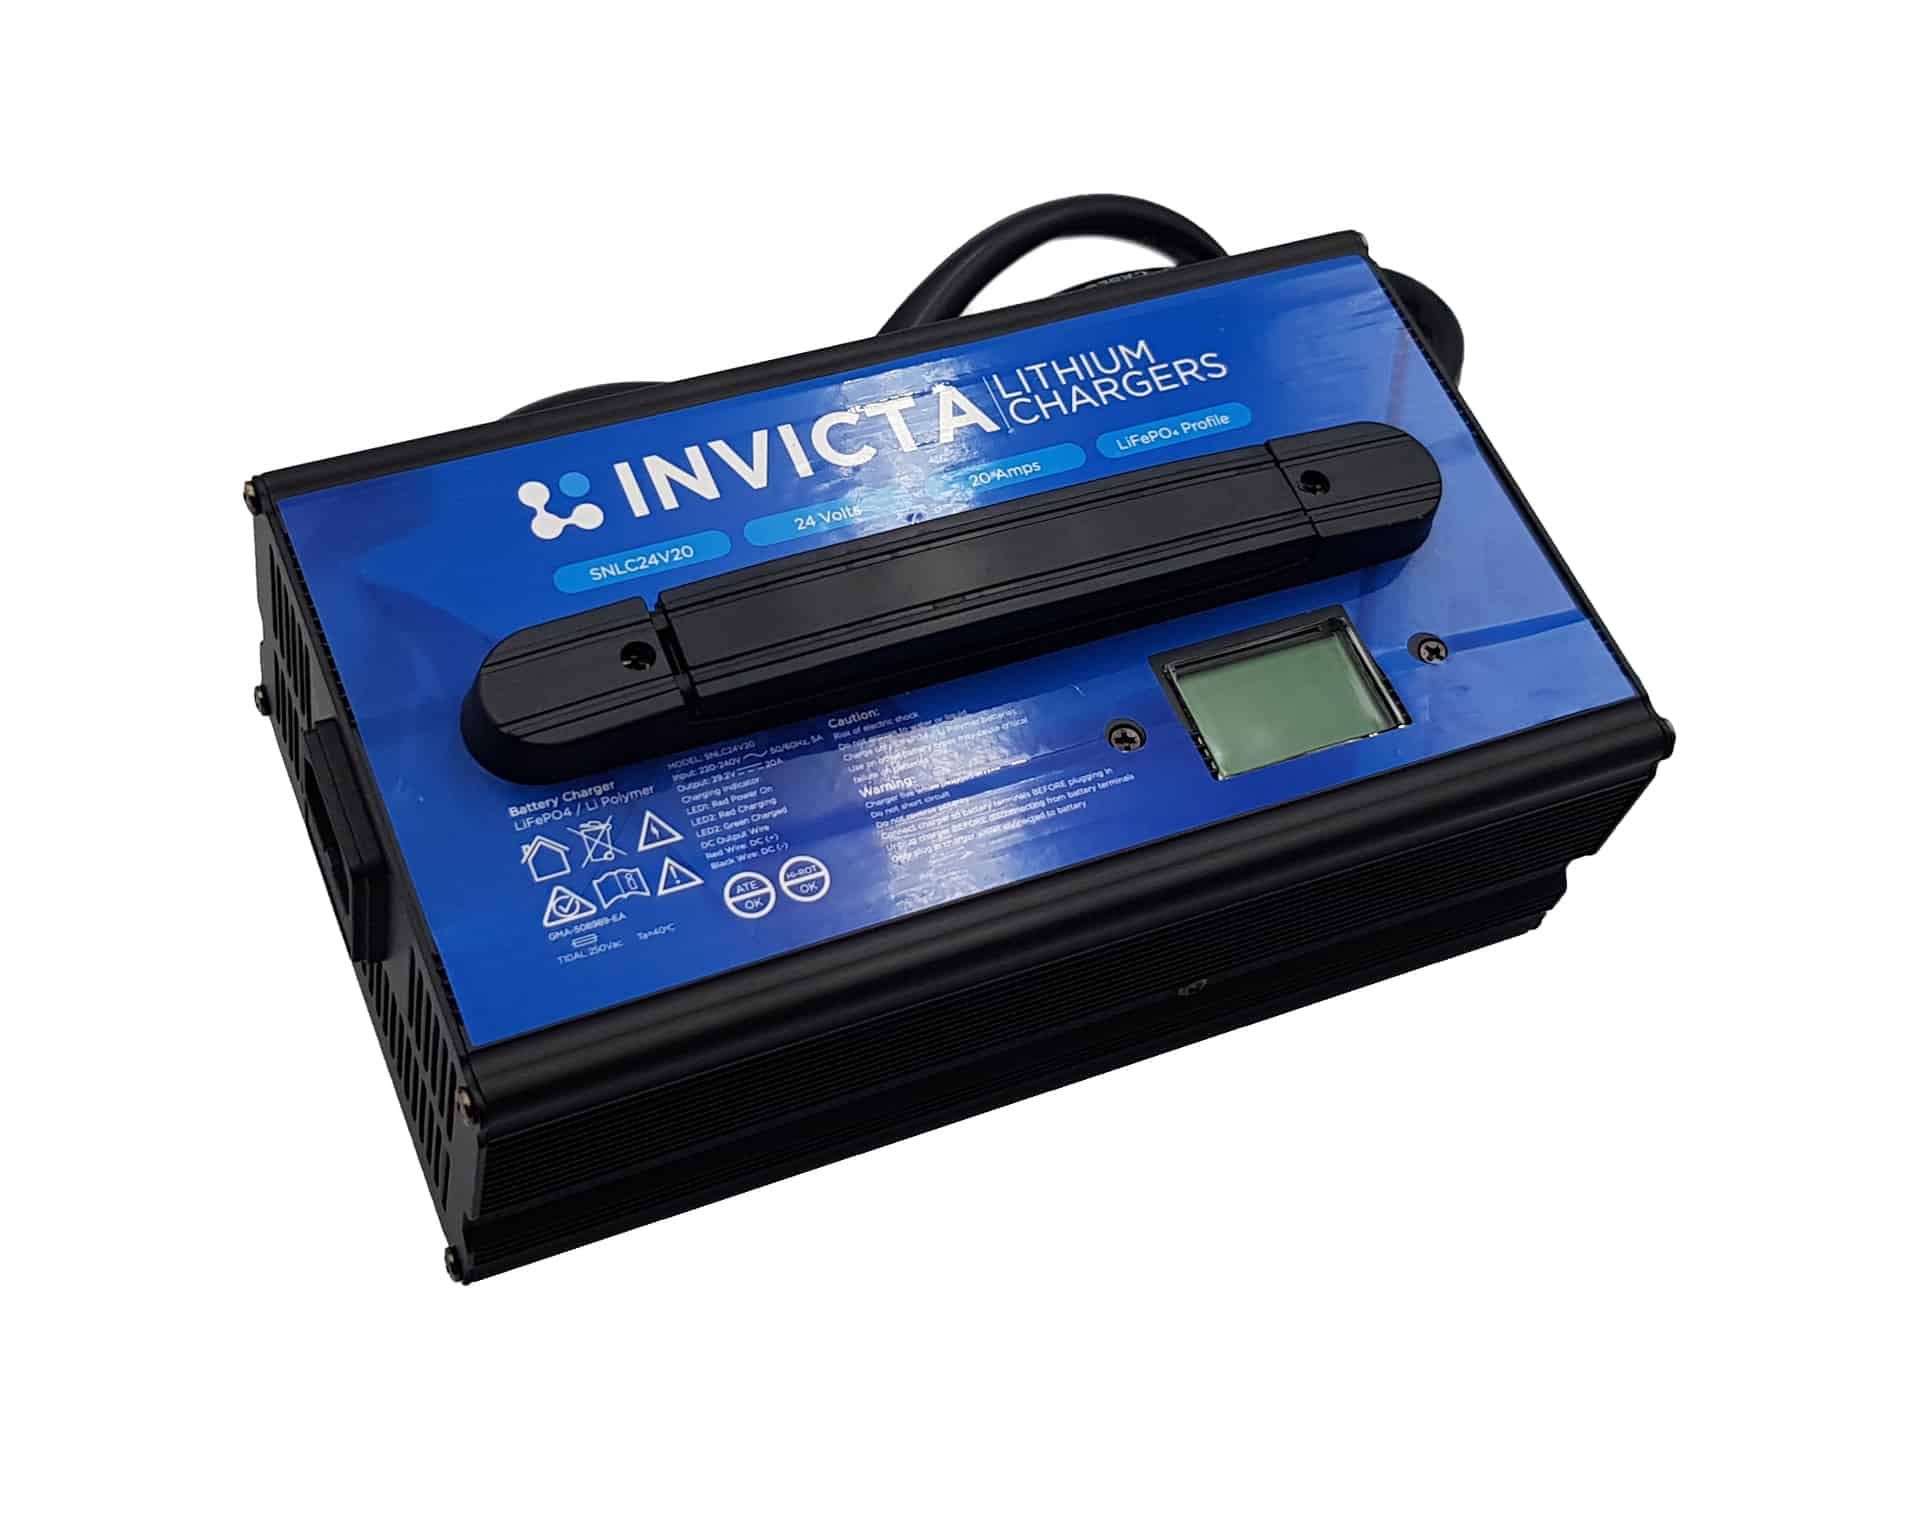 Invicta Lithium Chargers